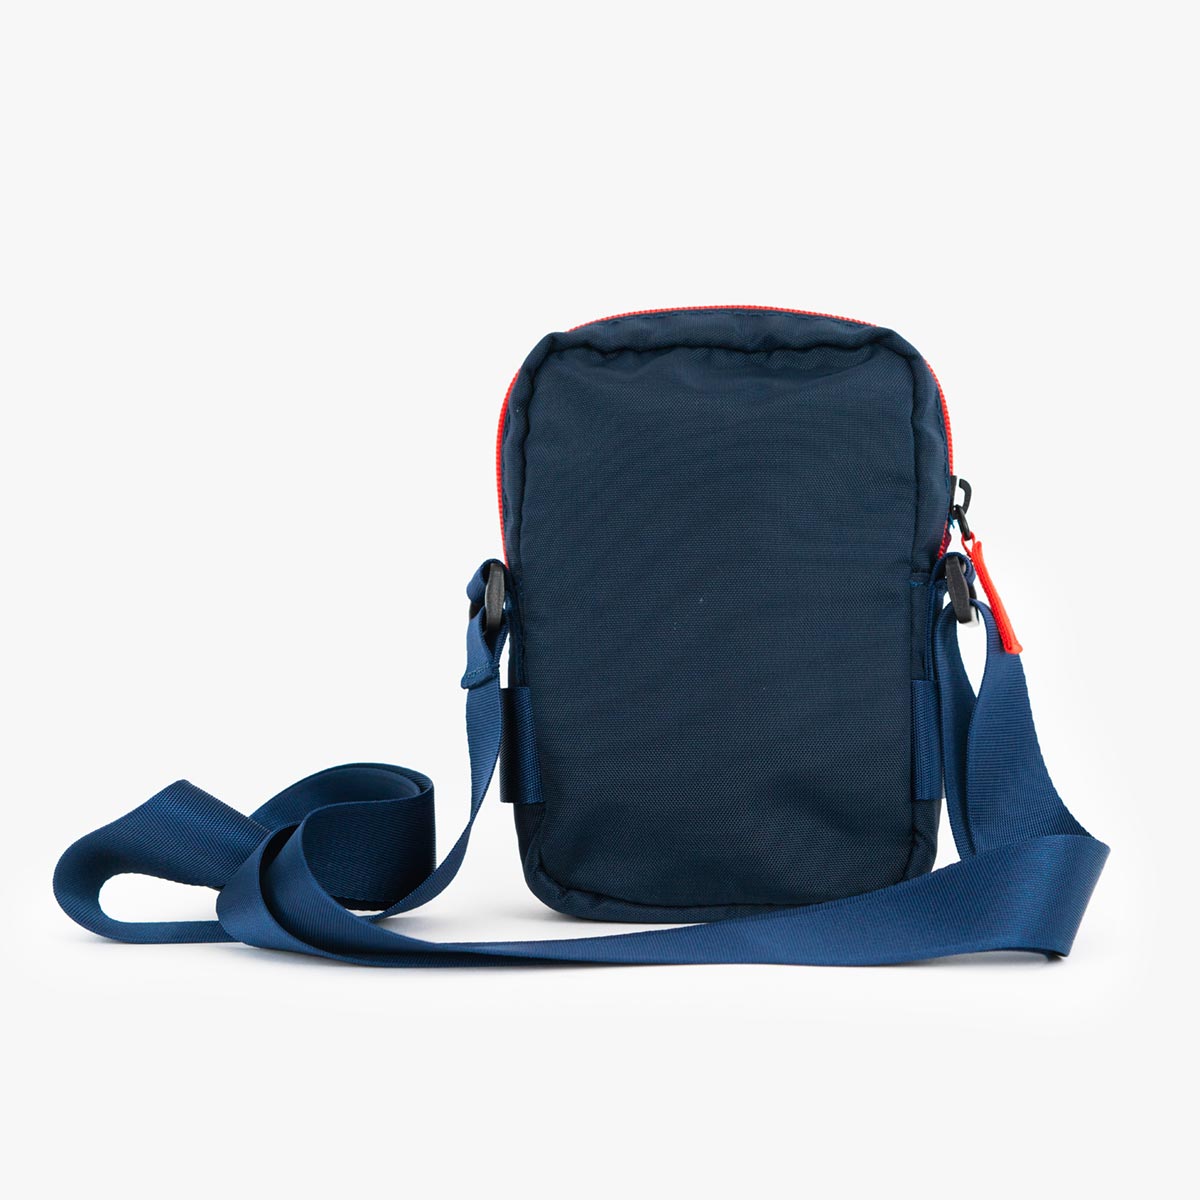 Oracle Red Bull Jetset Crossbody Bag in Navy Blue image number 4